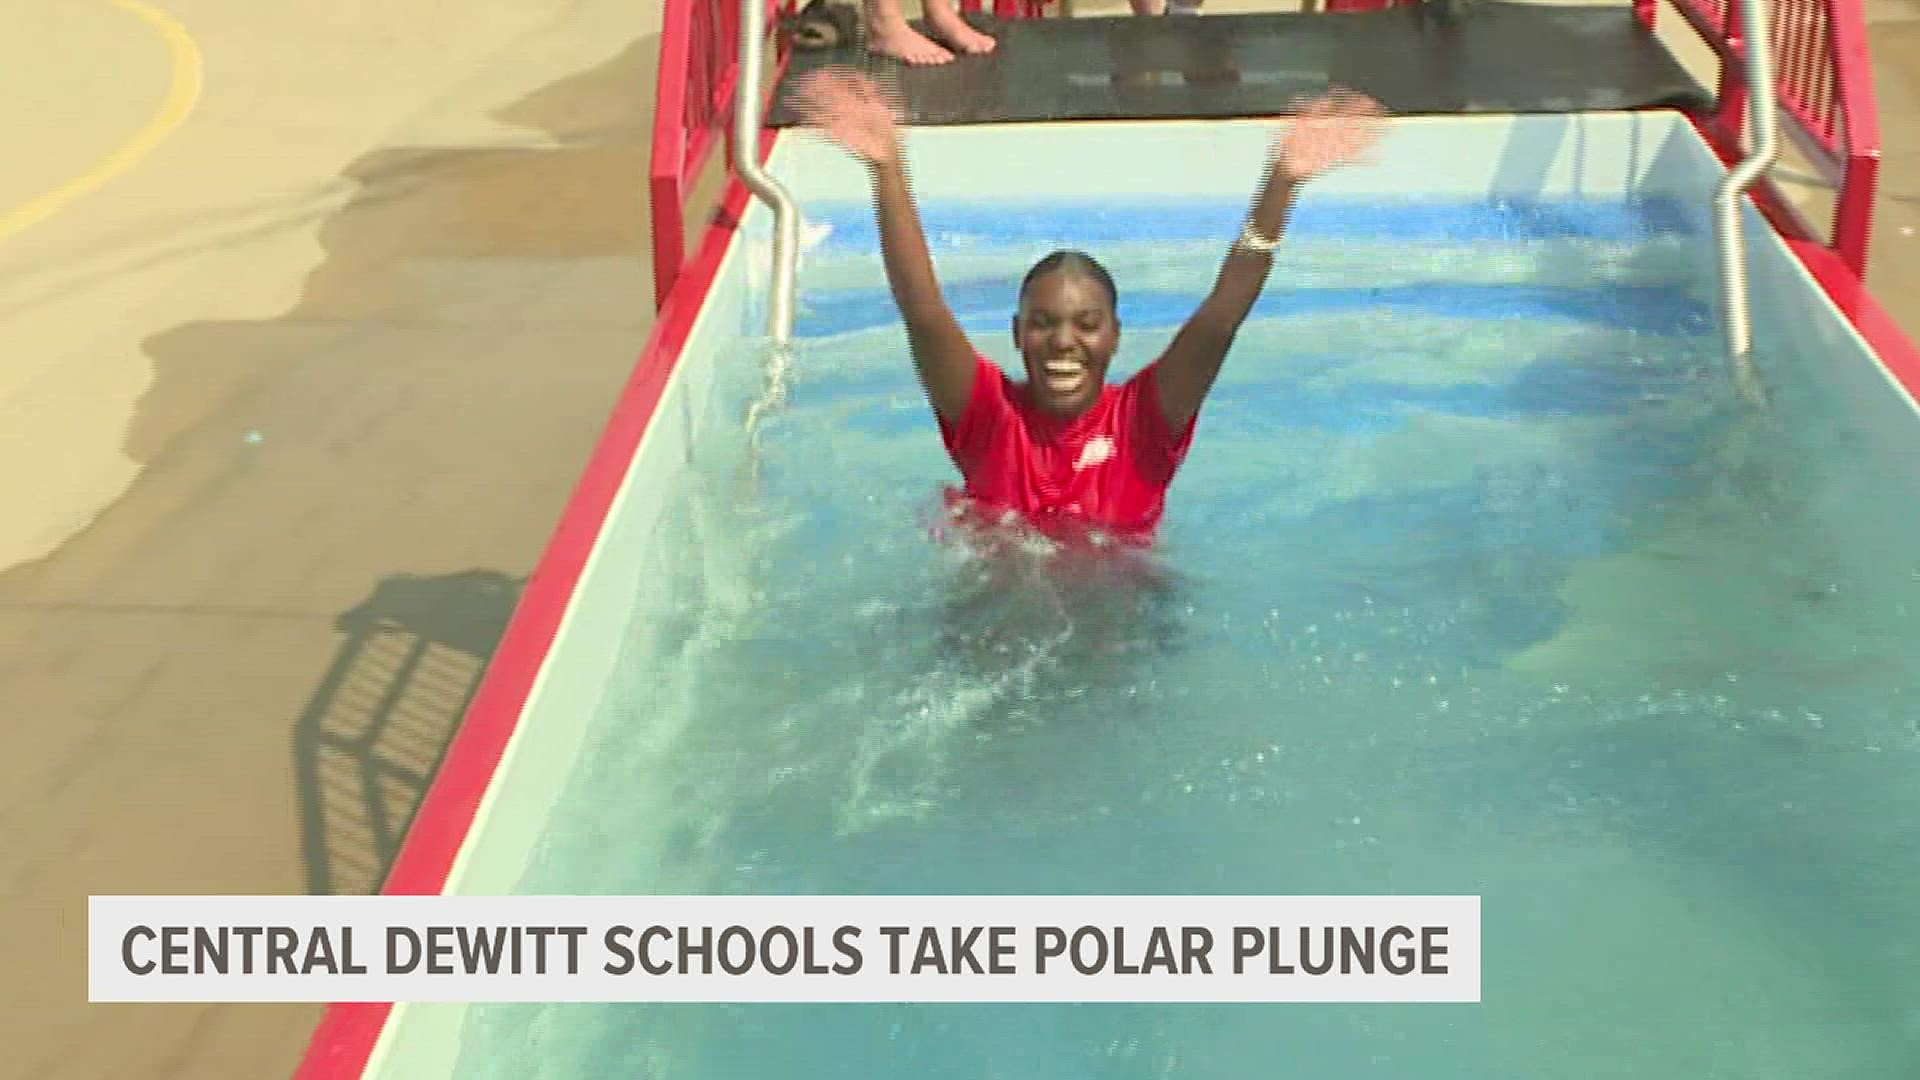 Our own Khalia Patterson got to join in on Central Dewitt's polar plunge event, helping to raise money for Special Olympics Iowa.